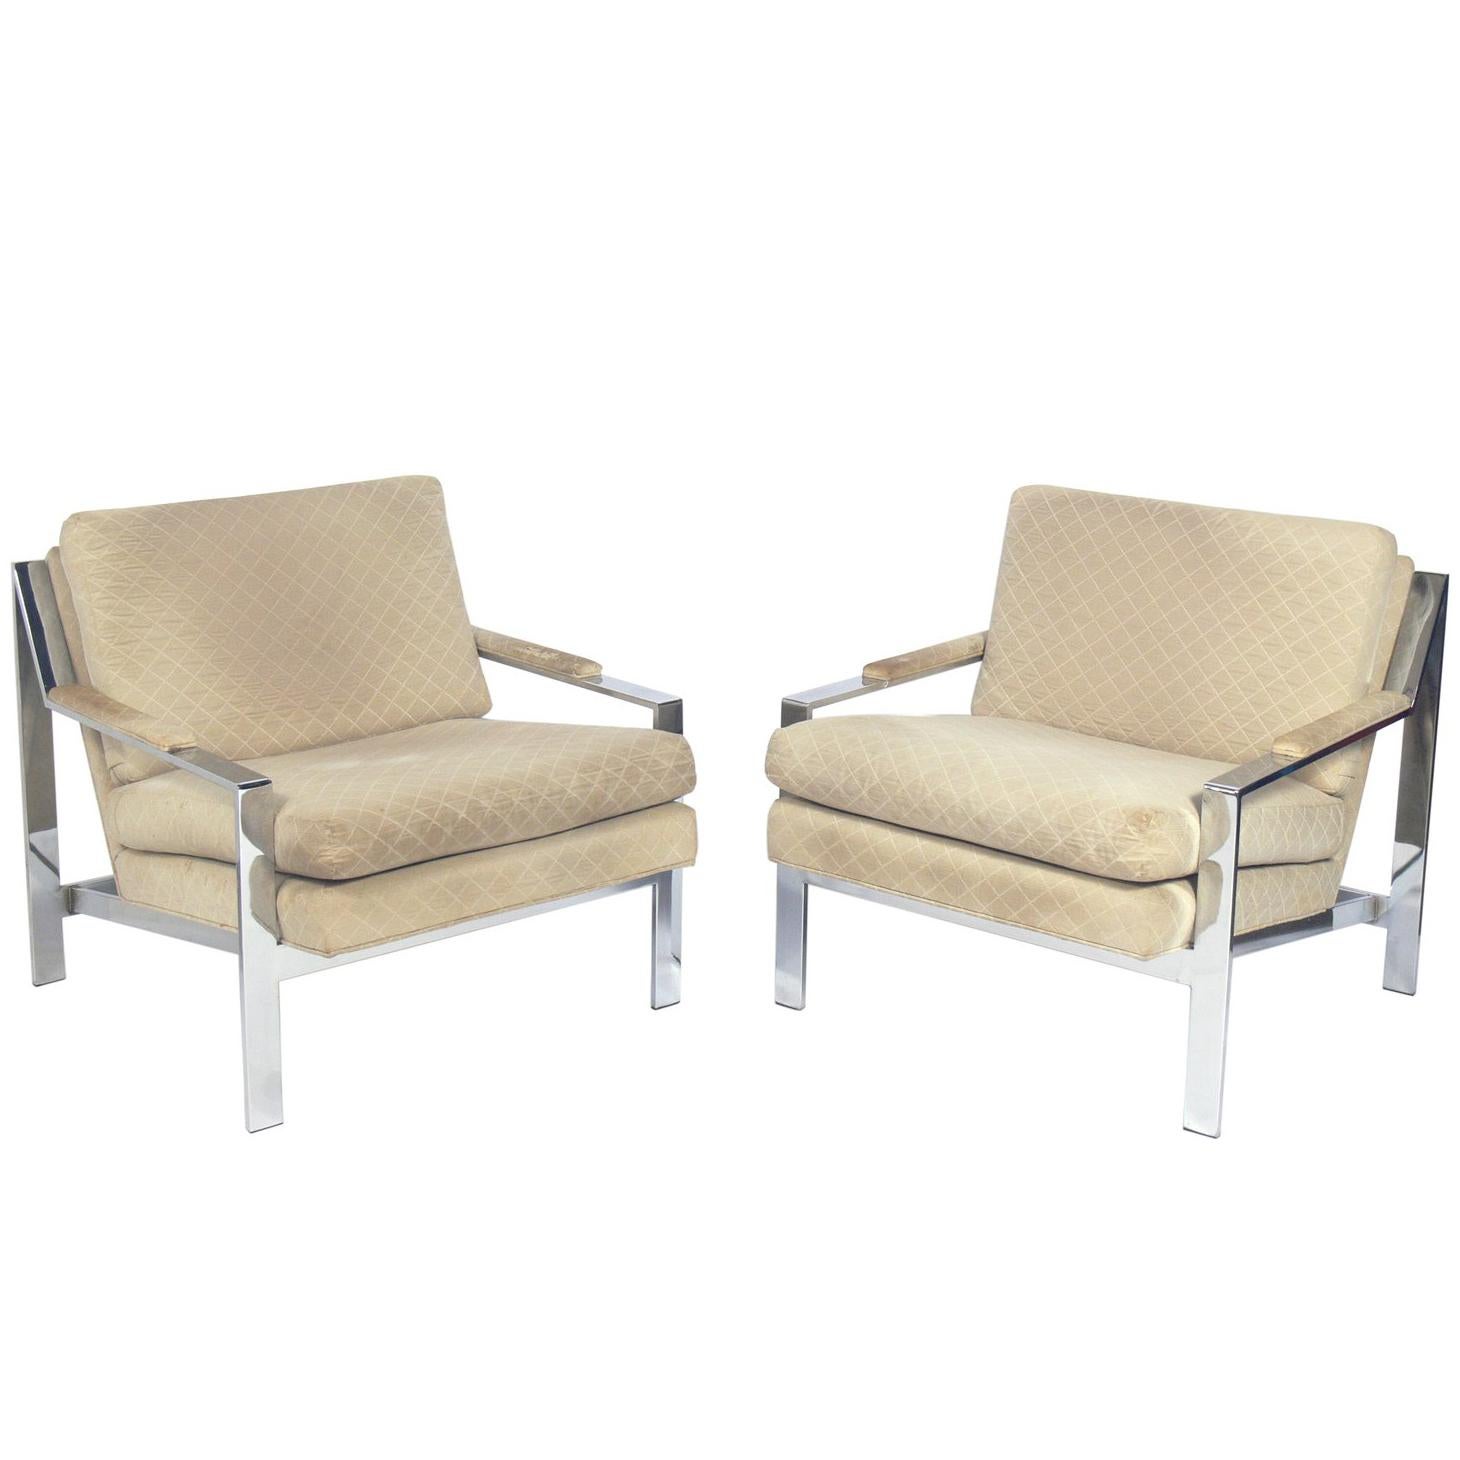 Pair of Chrome Lounge Chairs by Cy Mann